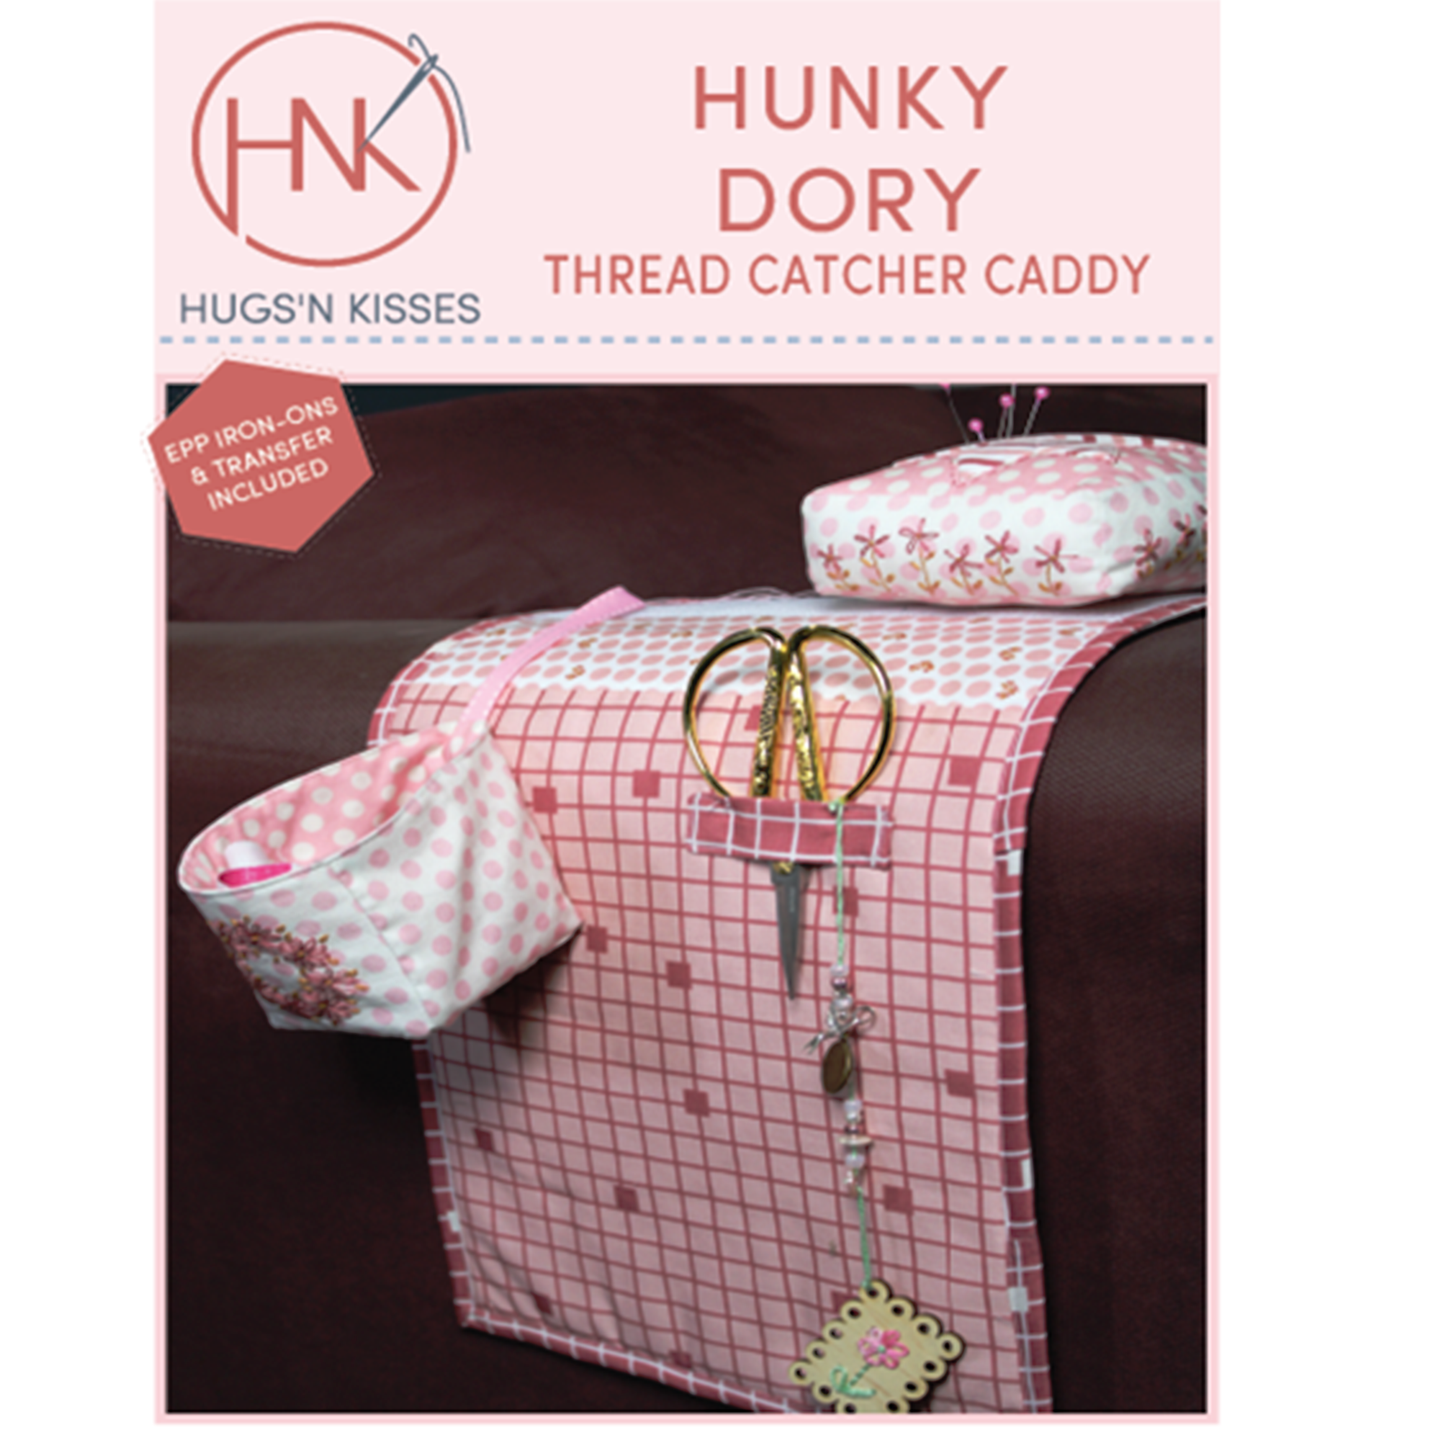 Hunky Dory thread catcher caddy English Paper Pieced Hugs 'N Kisses pattern